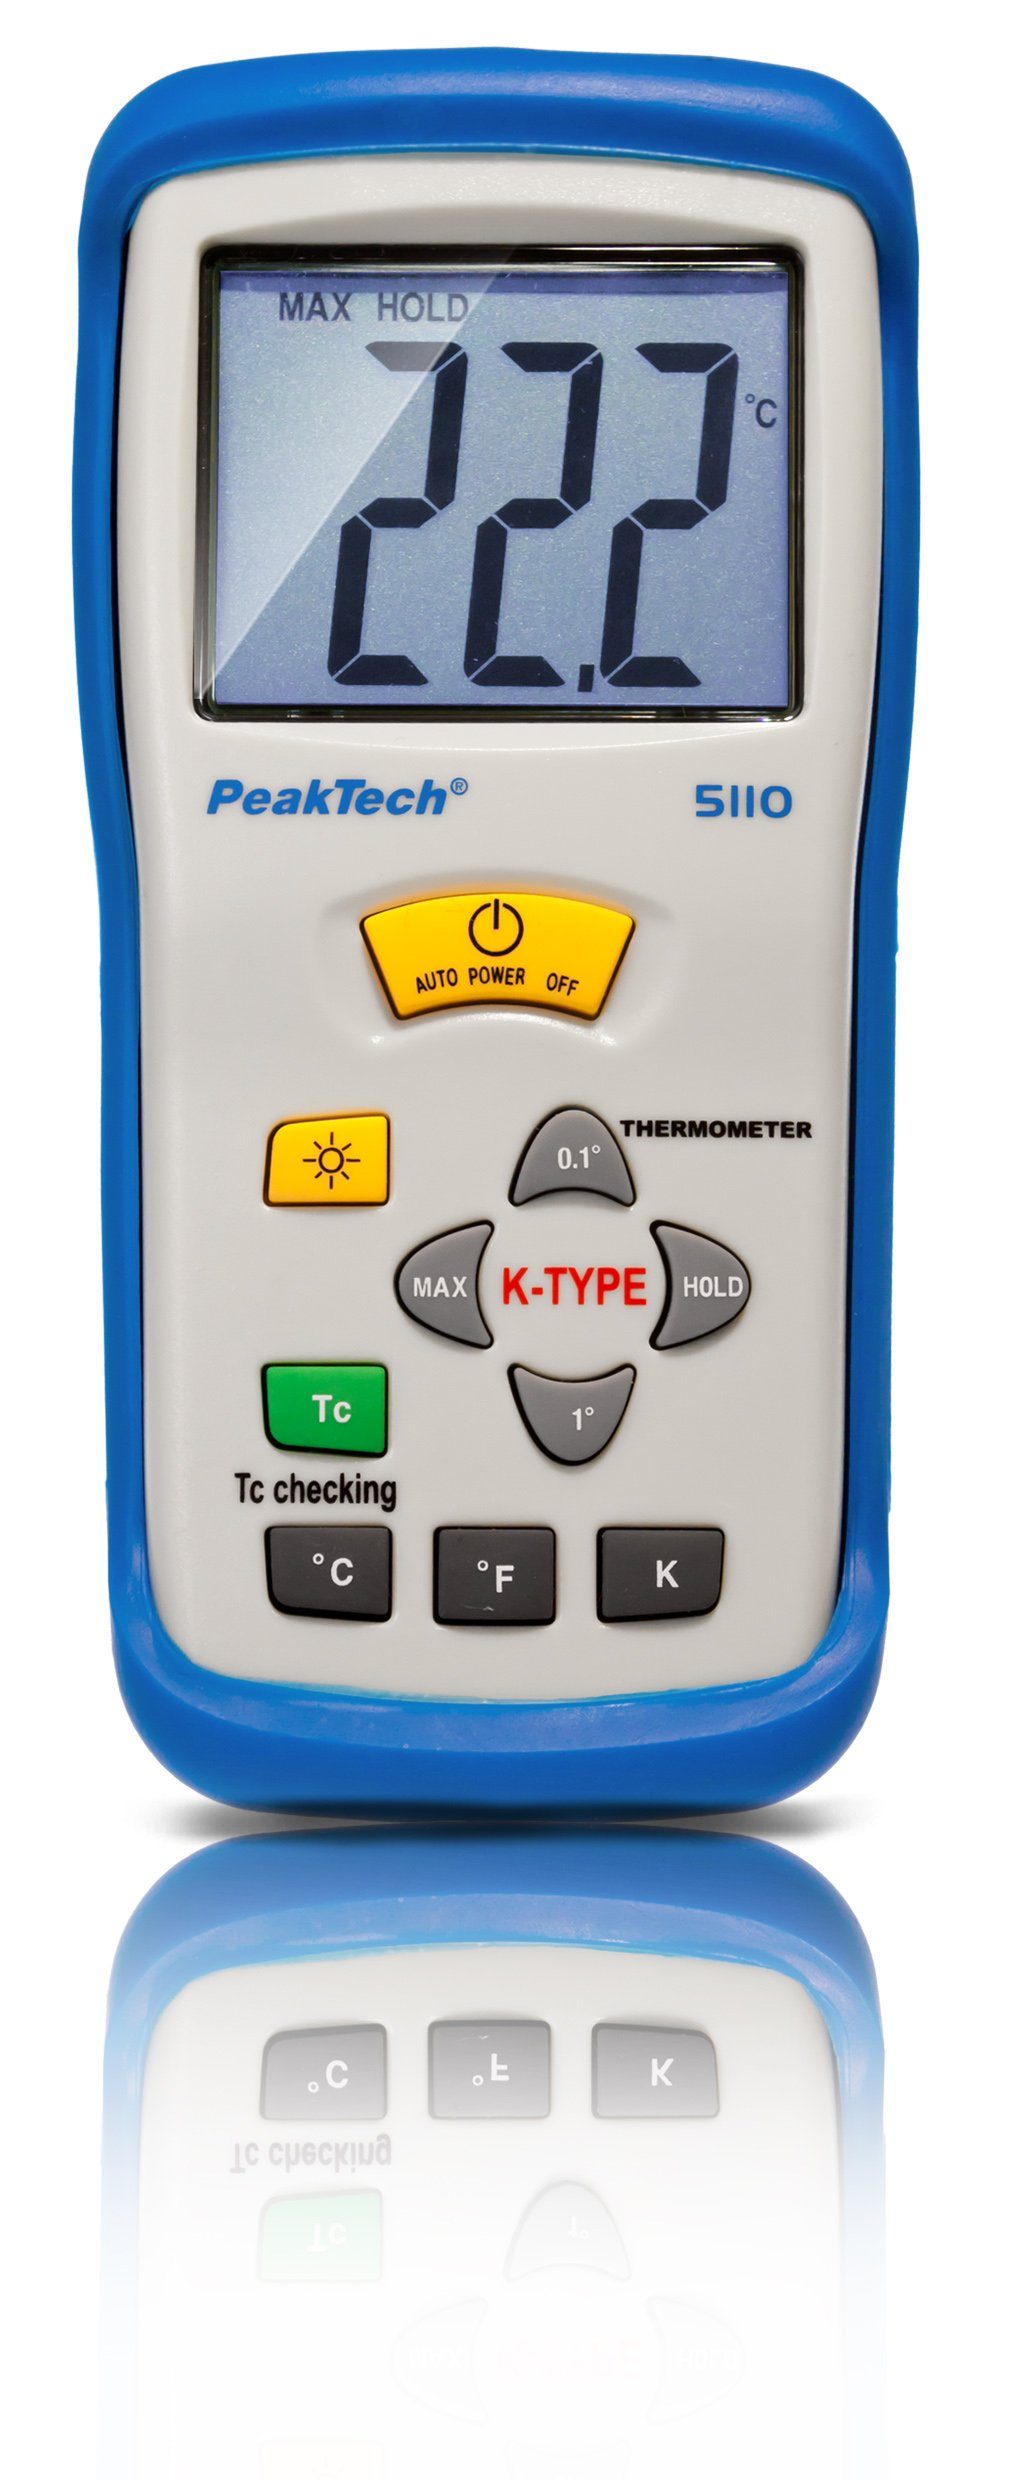 PeakTech Raumthermometer PeakTech P 5110: Digital-Thermometer -50 bis +1300°C in °C/°F/K, 1-tlg.